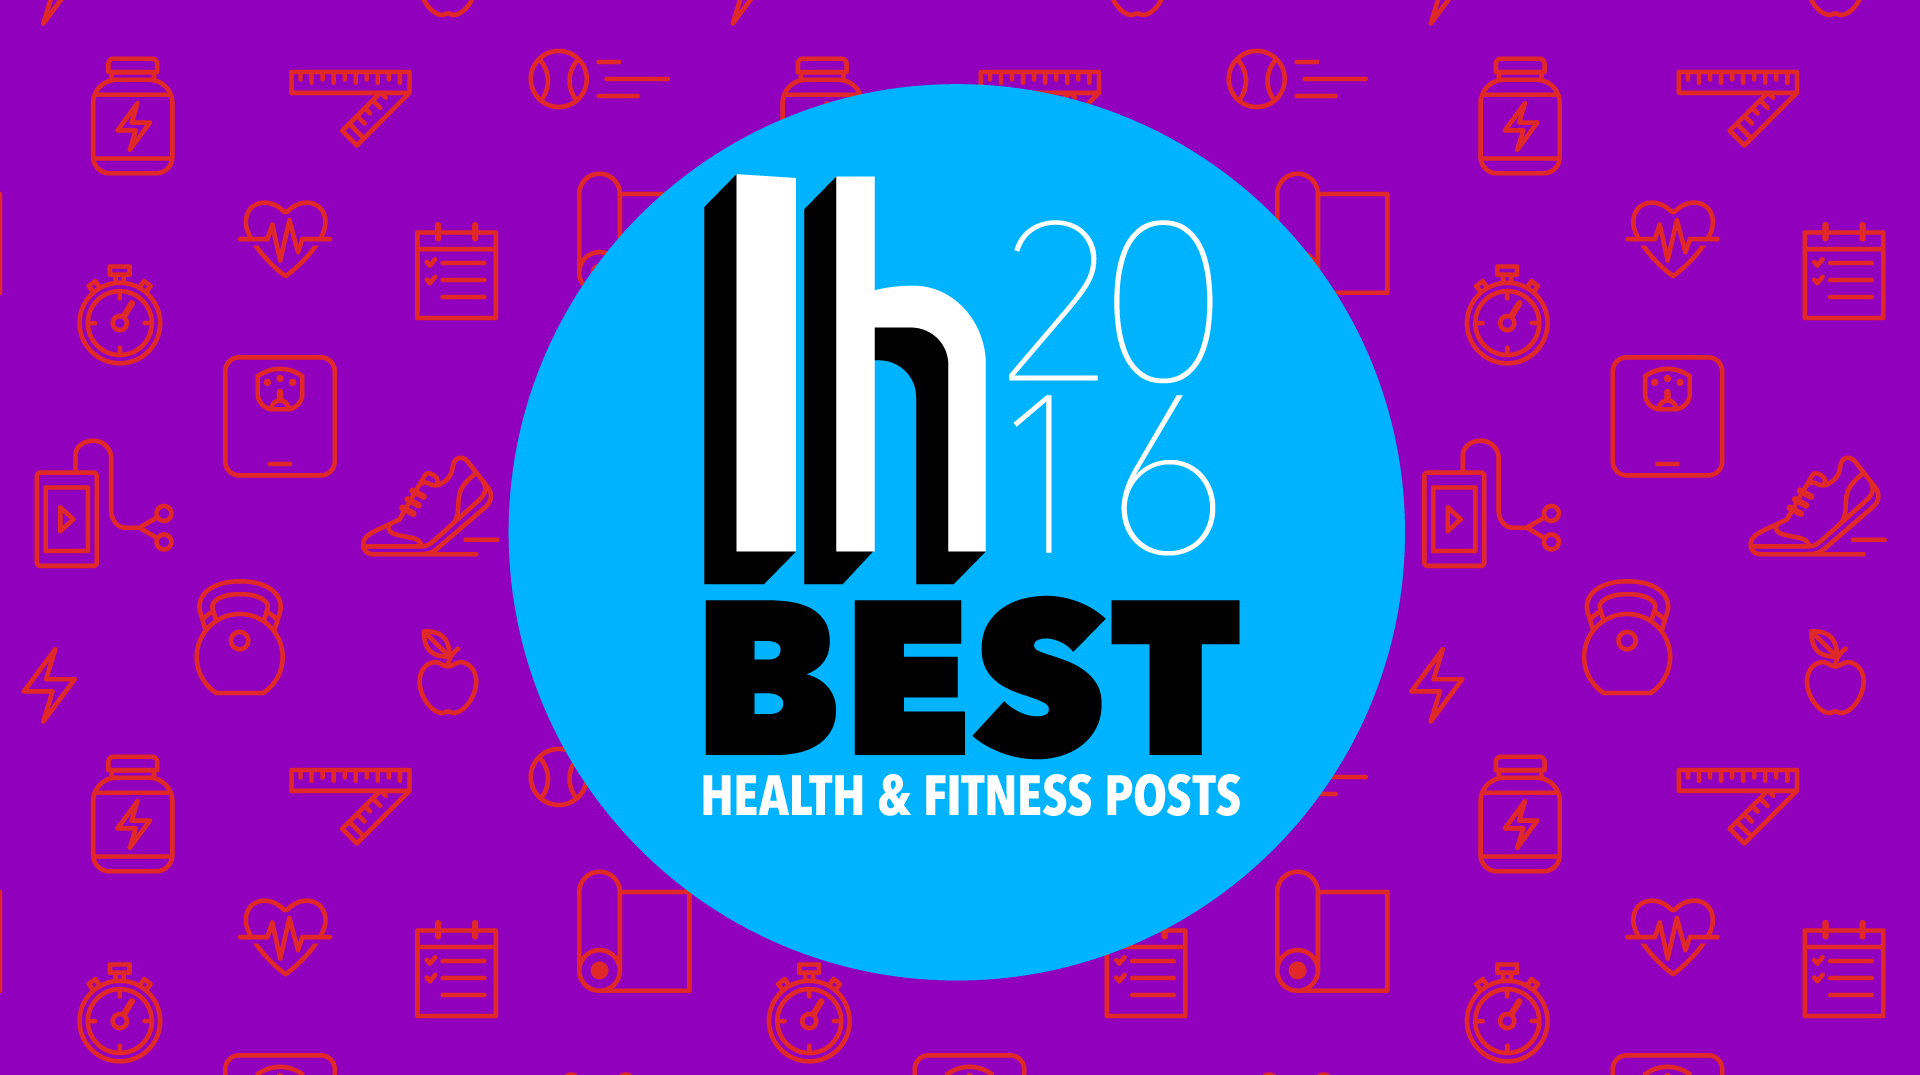 Most Popular Health And Fitness Posts Of 2016